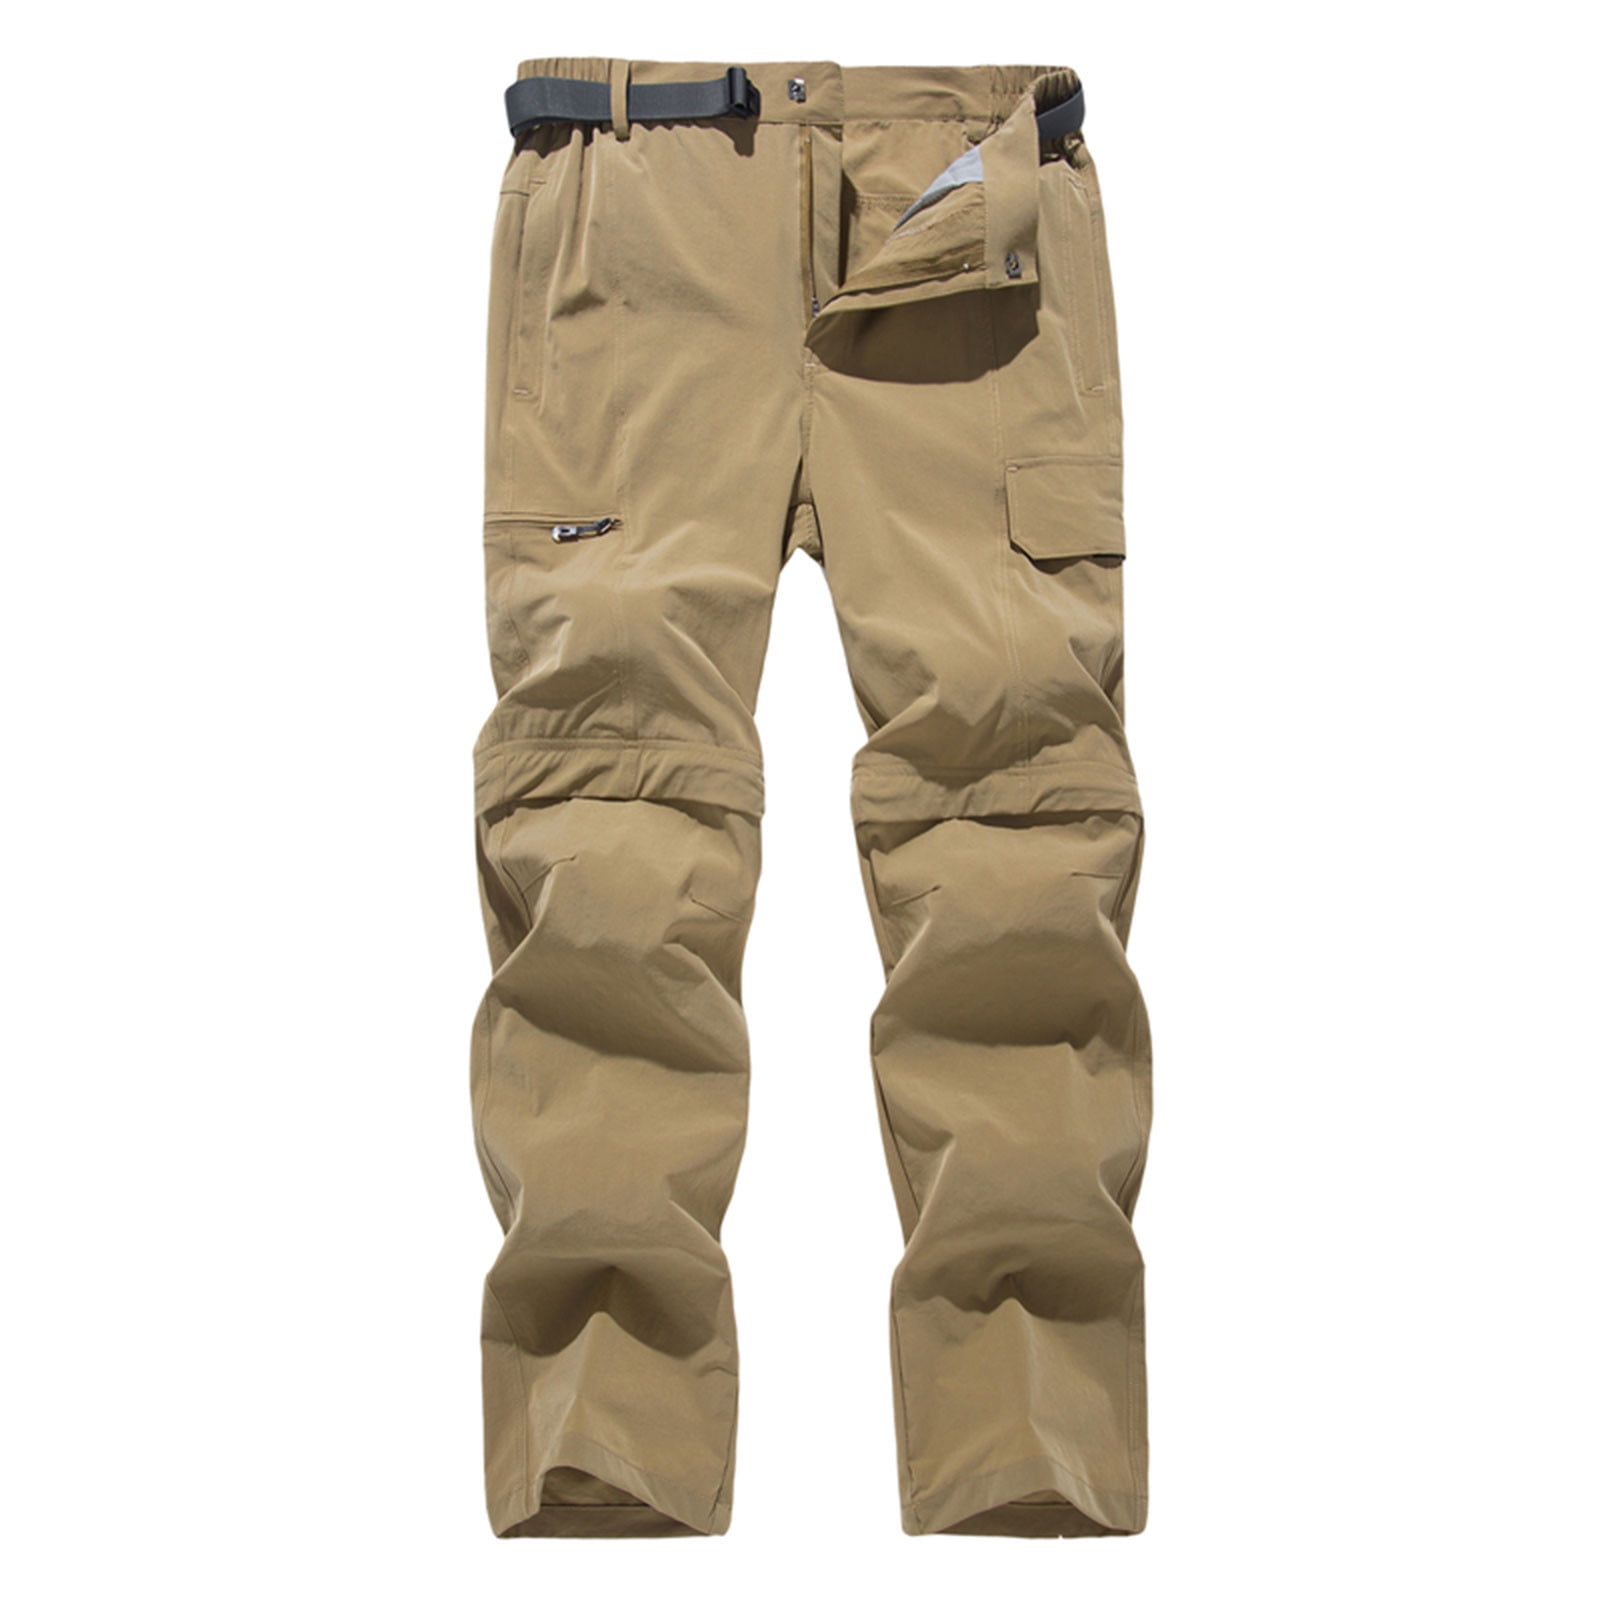 Men's-Convertible-Hiking-Pants Quick Dry Lightweight Zip Off Breathable ...